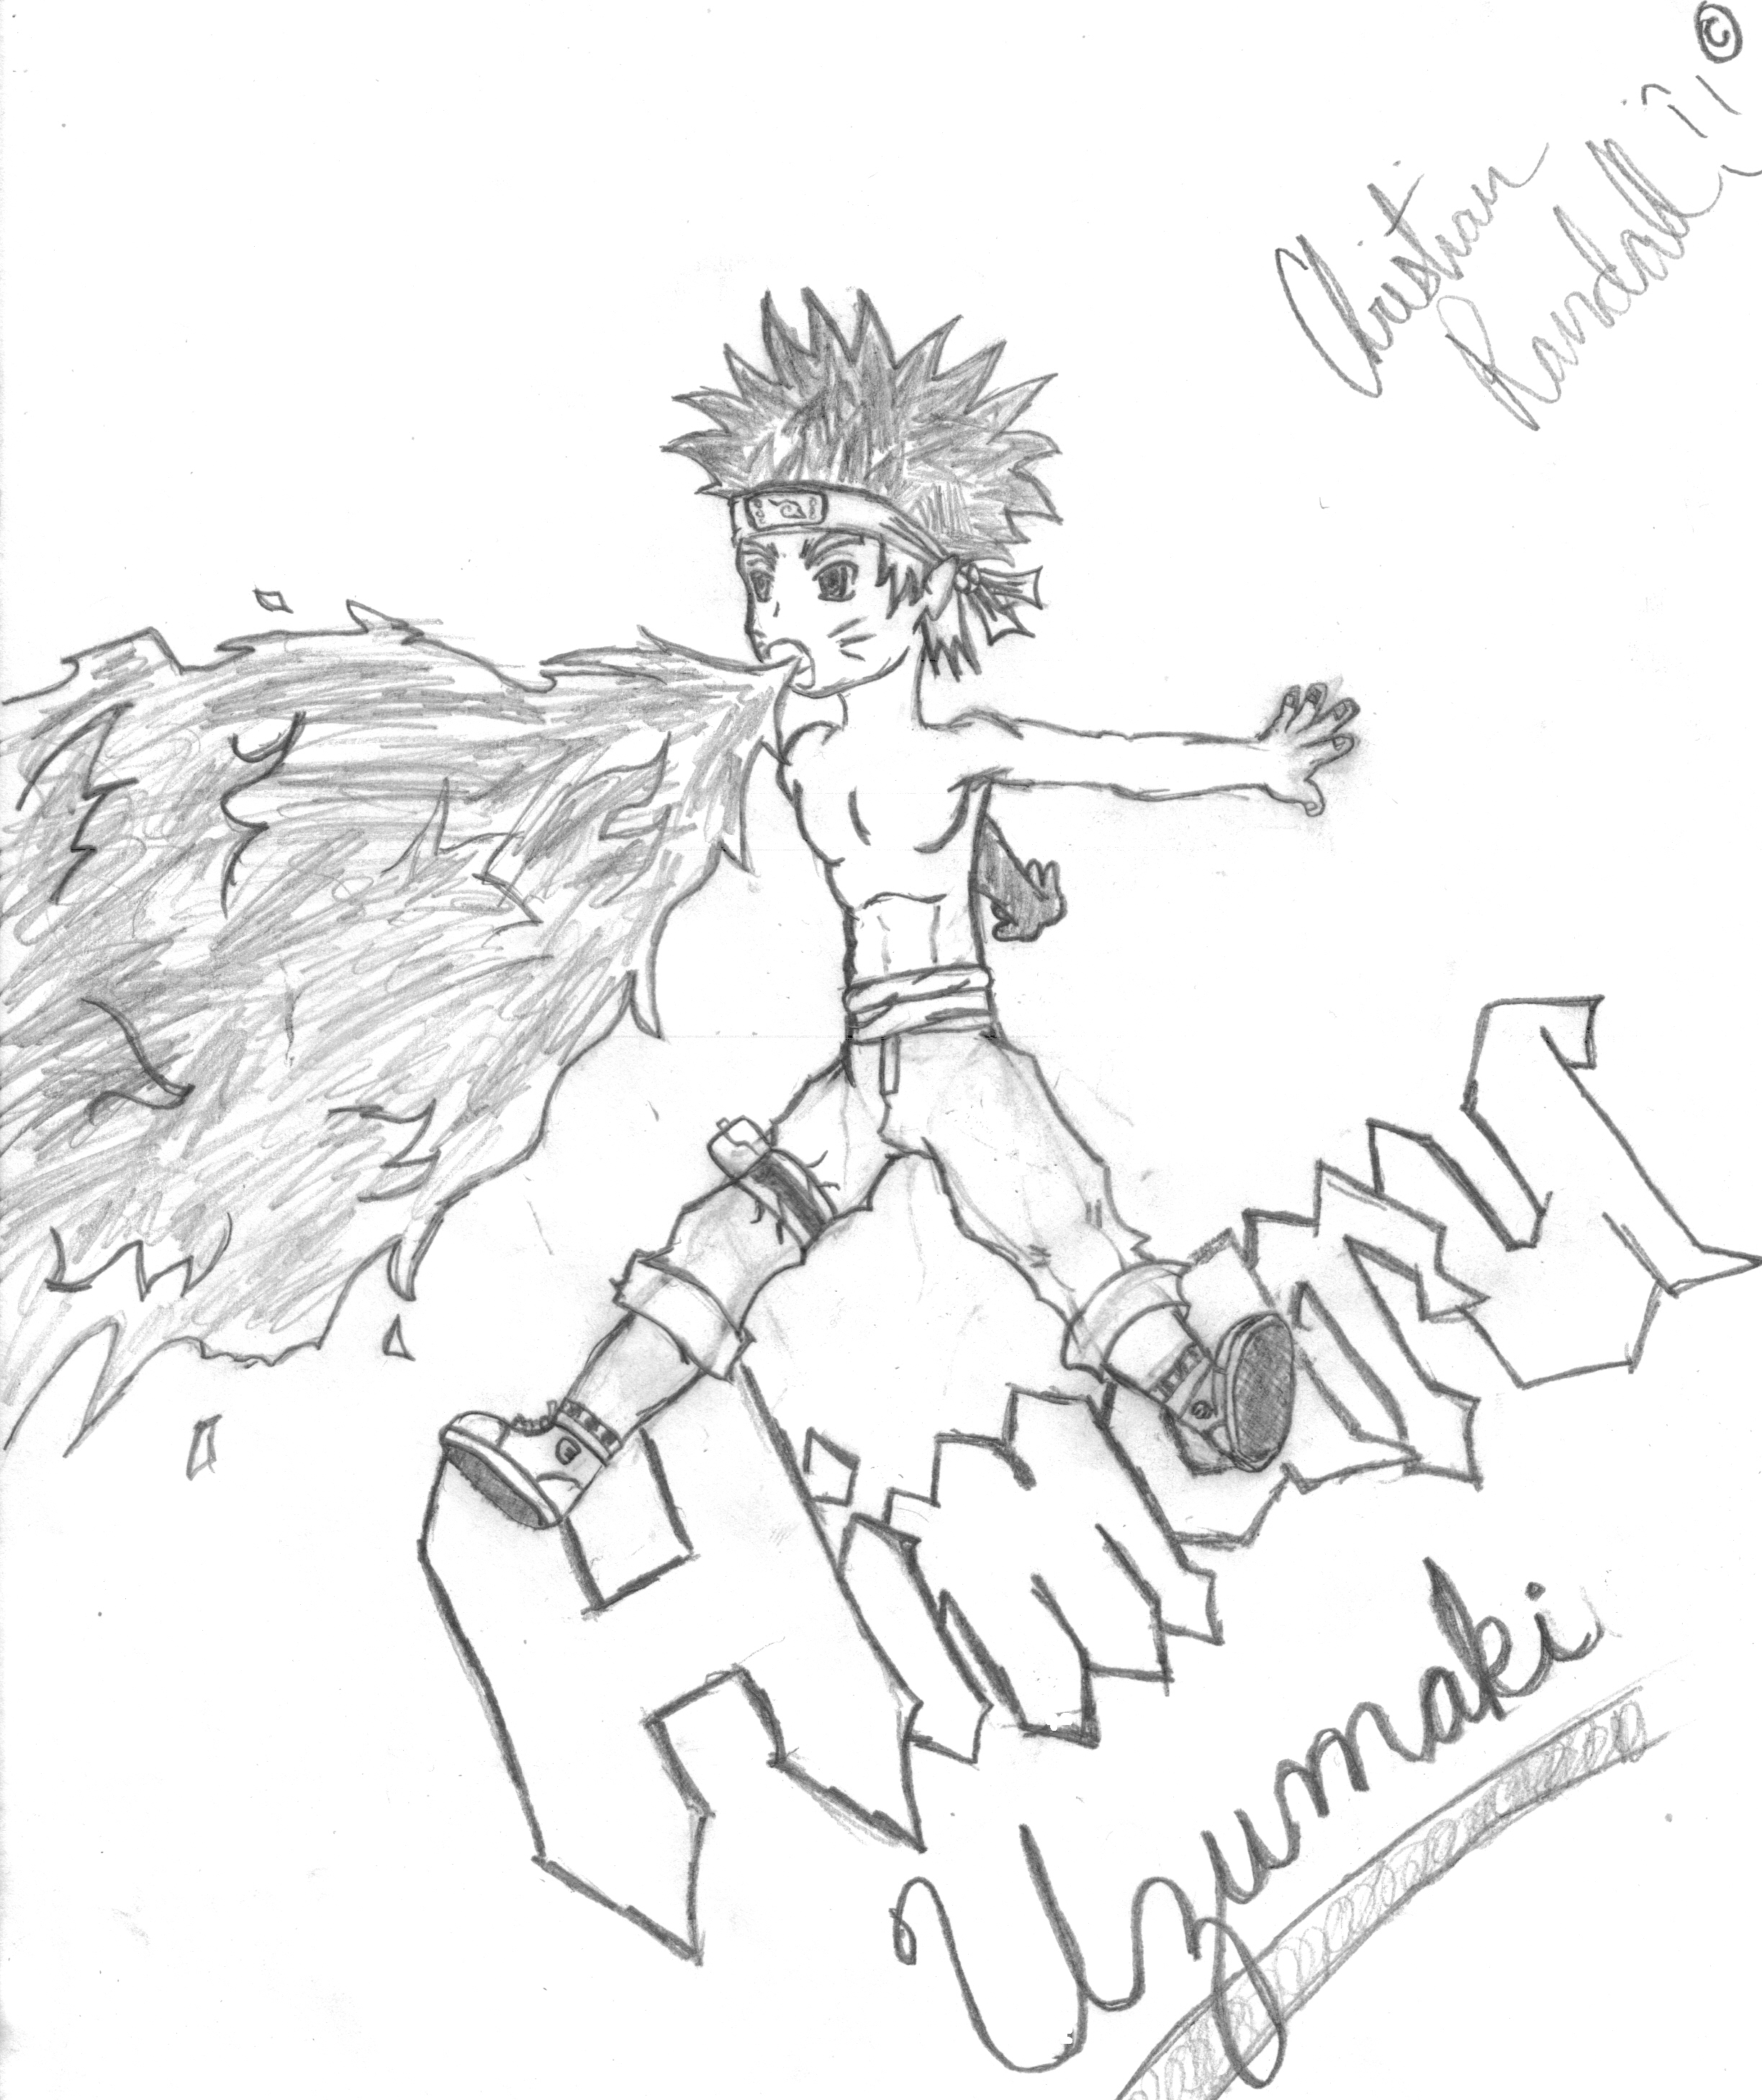 Himaru Uzumaki, the Legacy of the Rokudaime! by WightKnight2